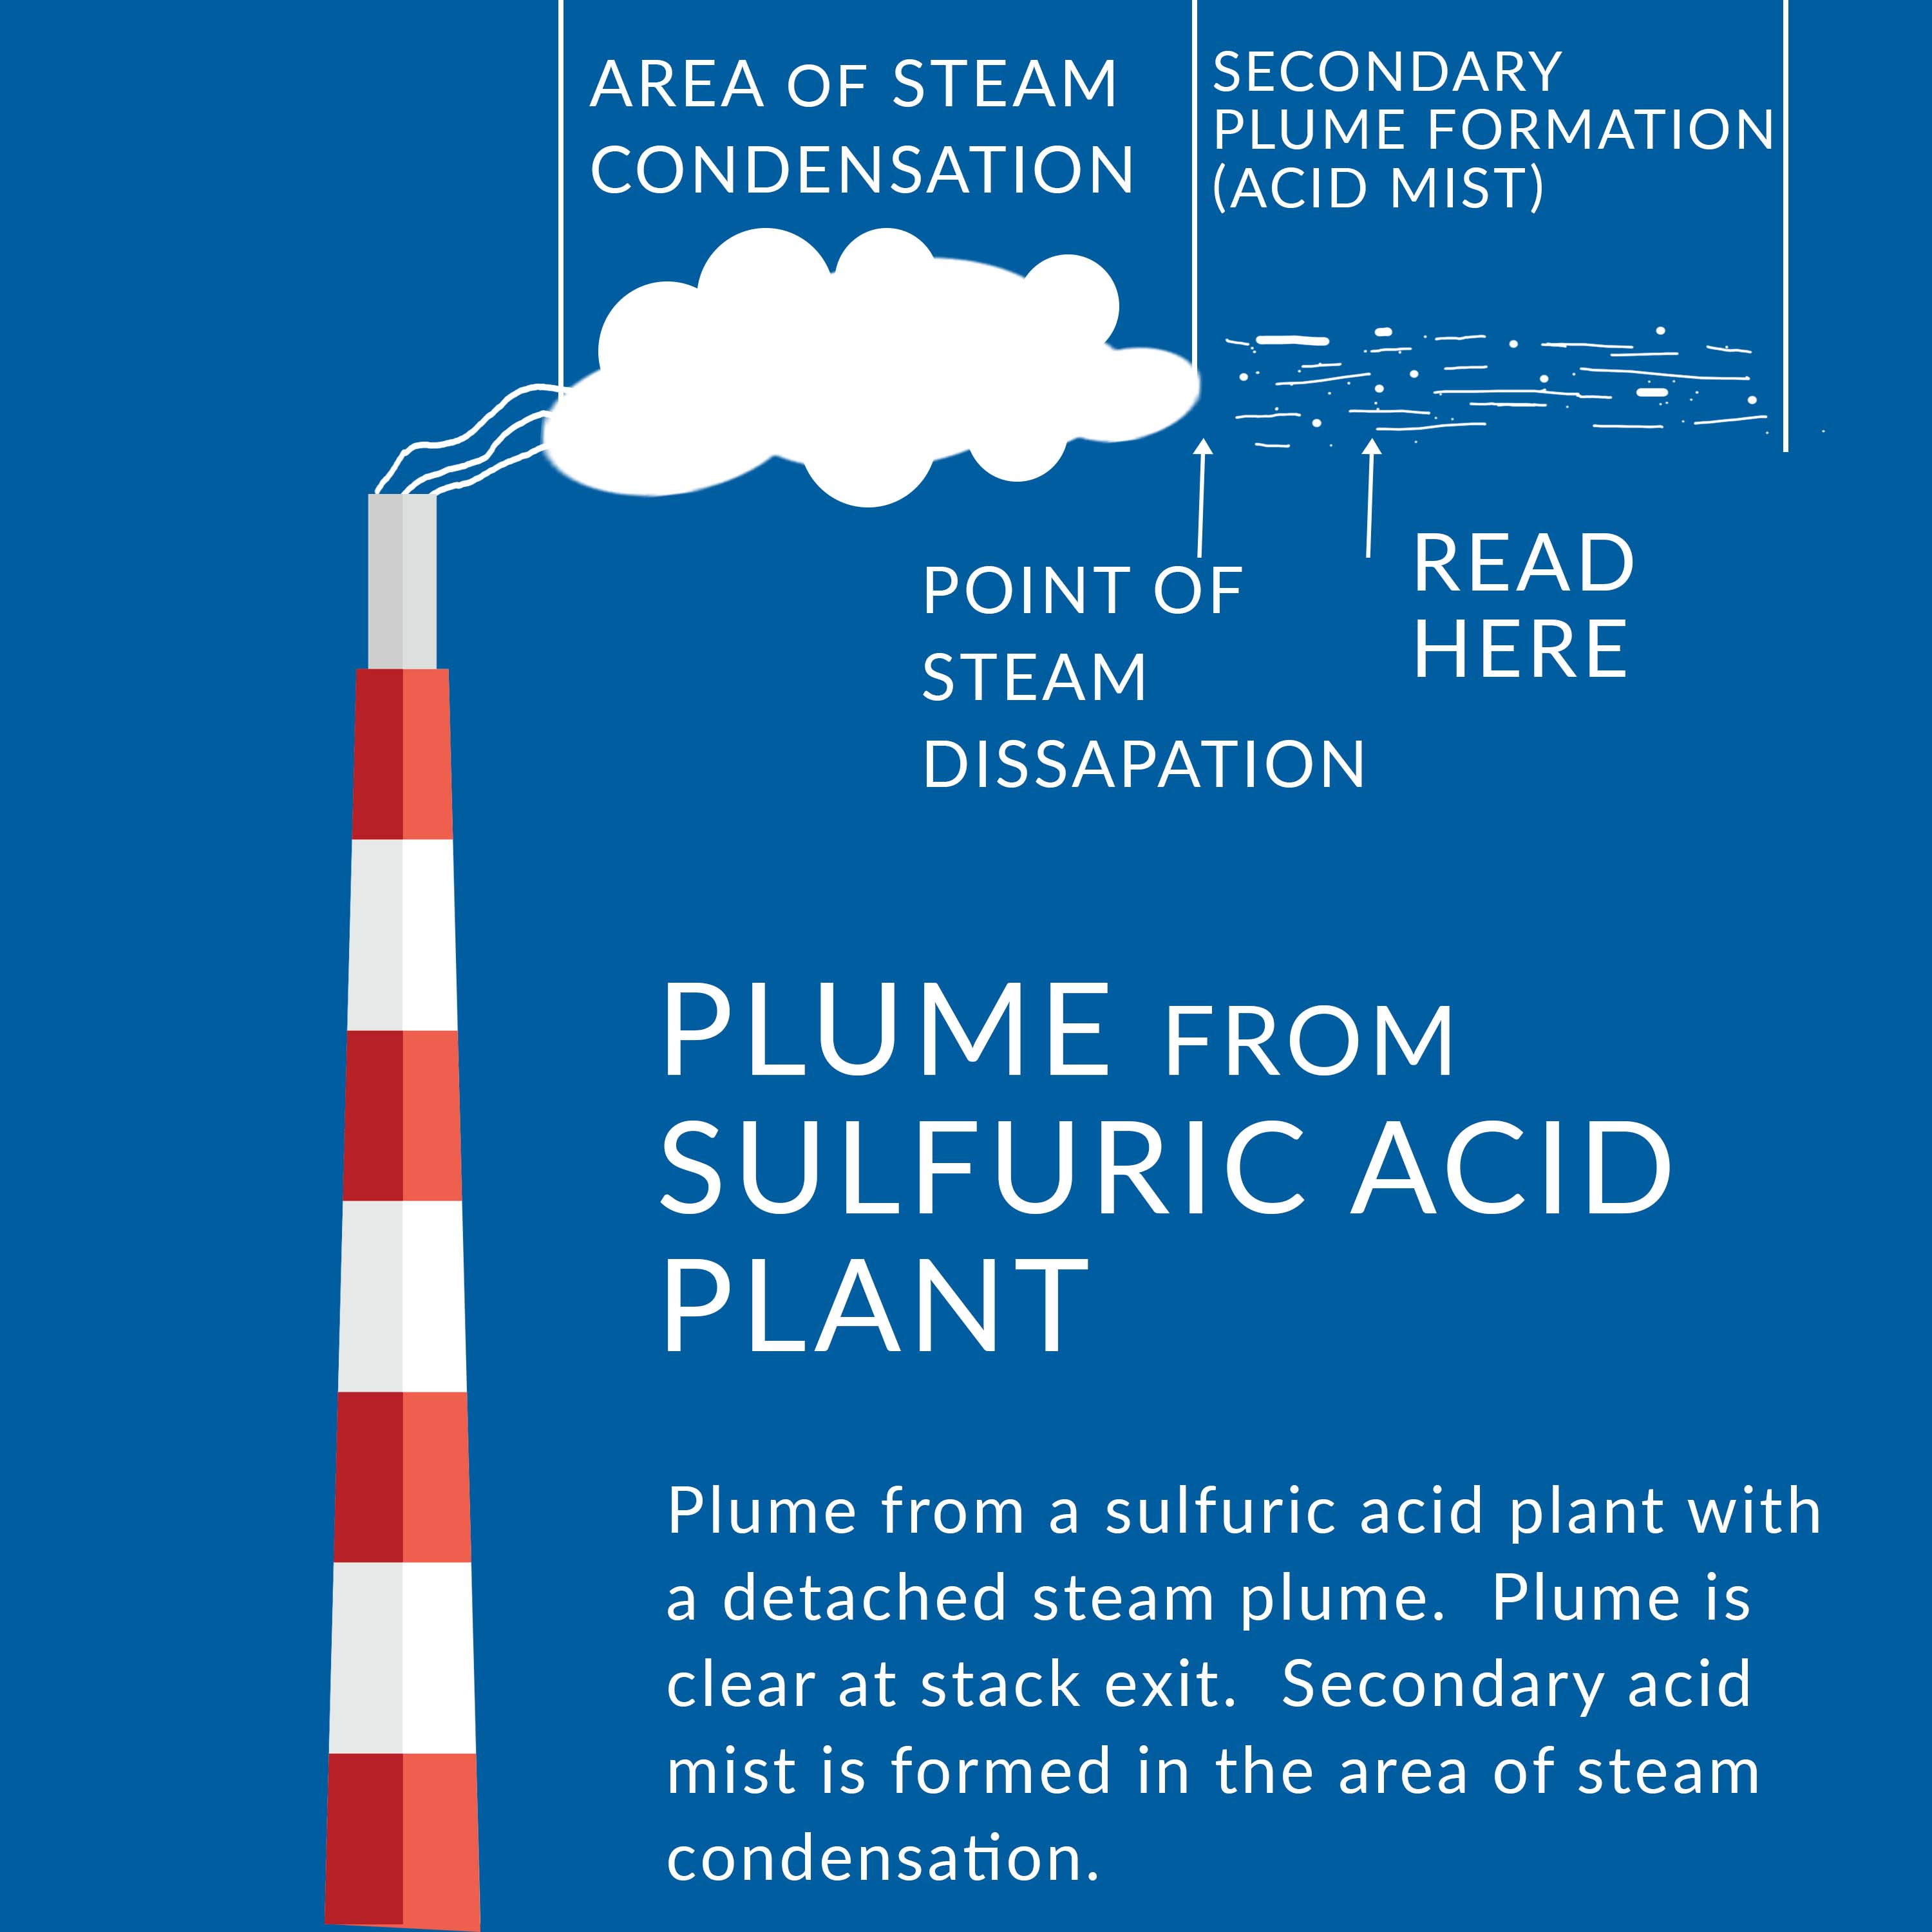 Plume from sulfuric acid